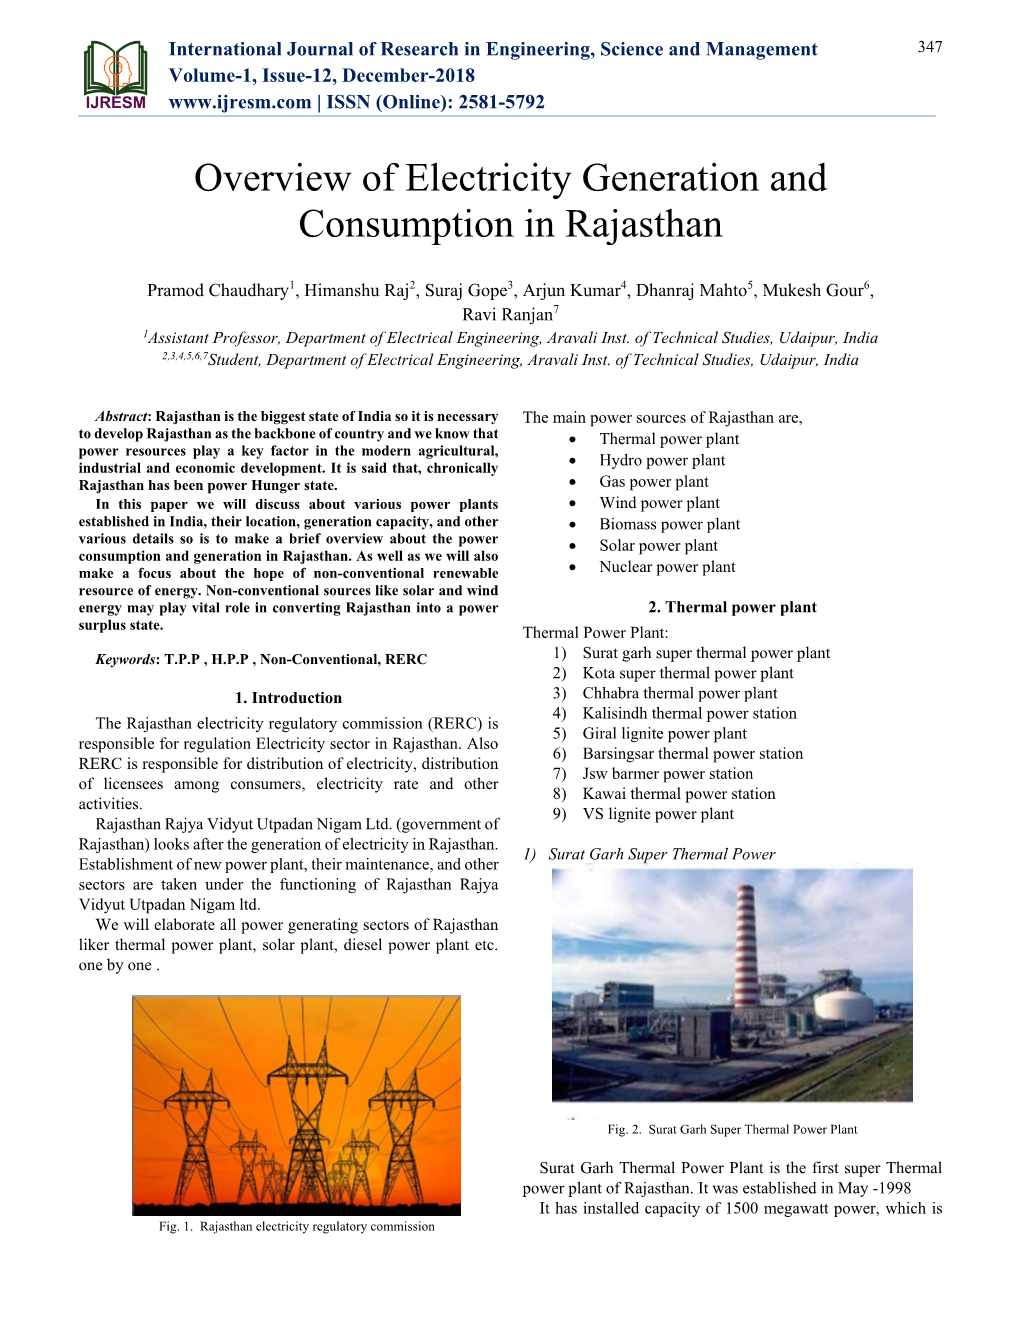 Overview of Electricity Generation and Consumption in Rajasthan